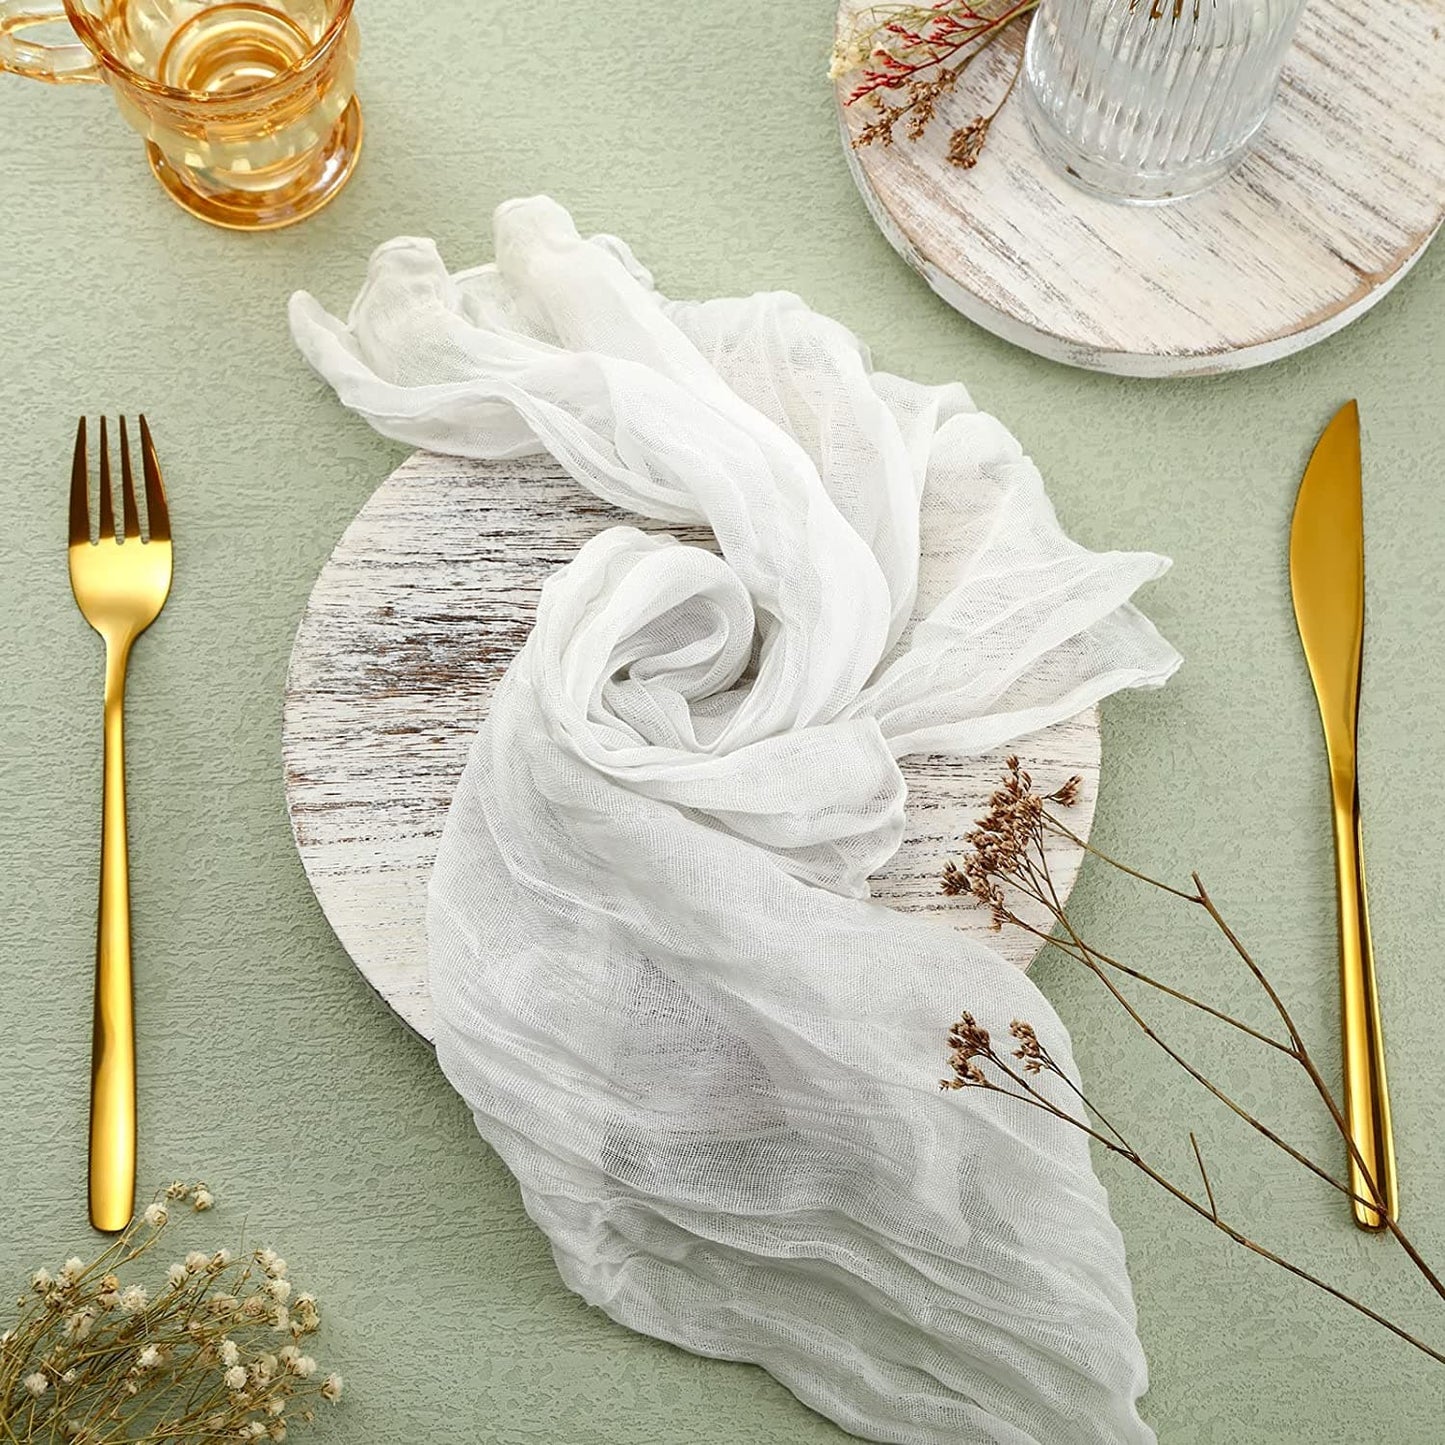 Rustic Gauze Cheesecloth Napkins